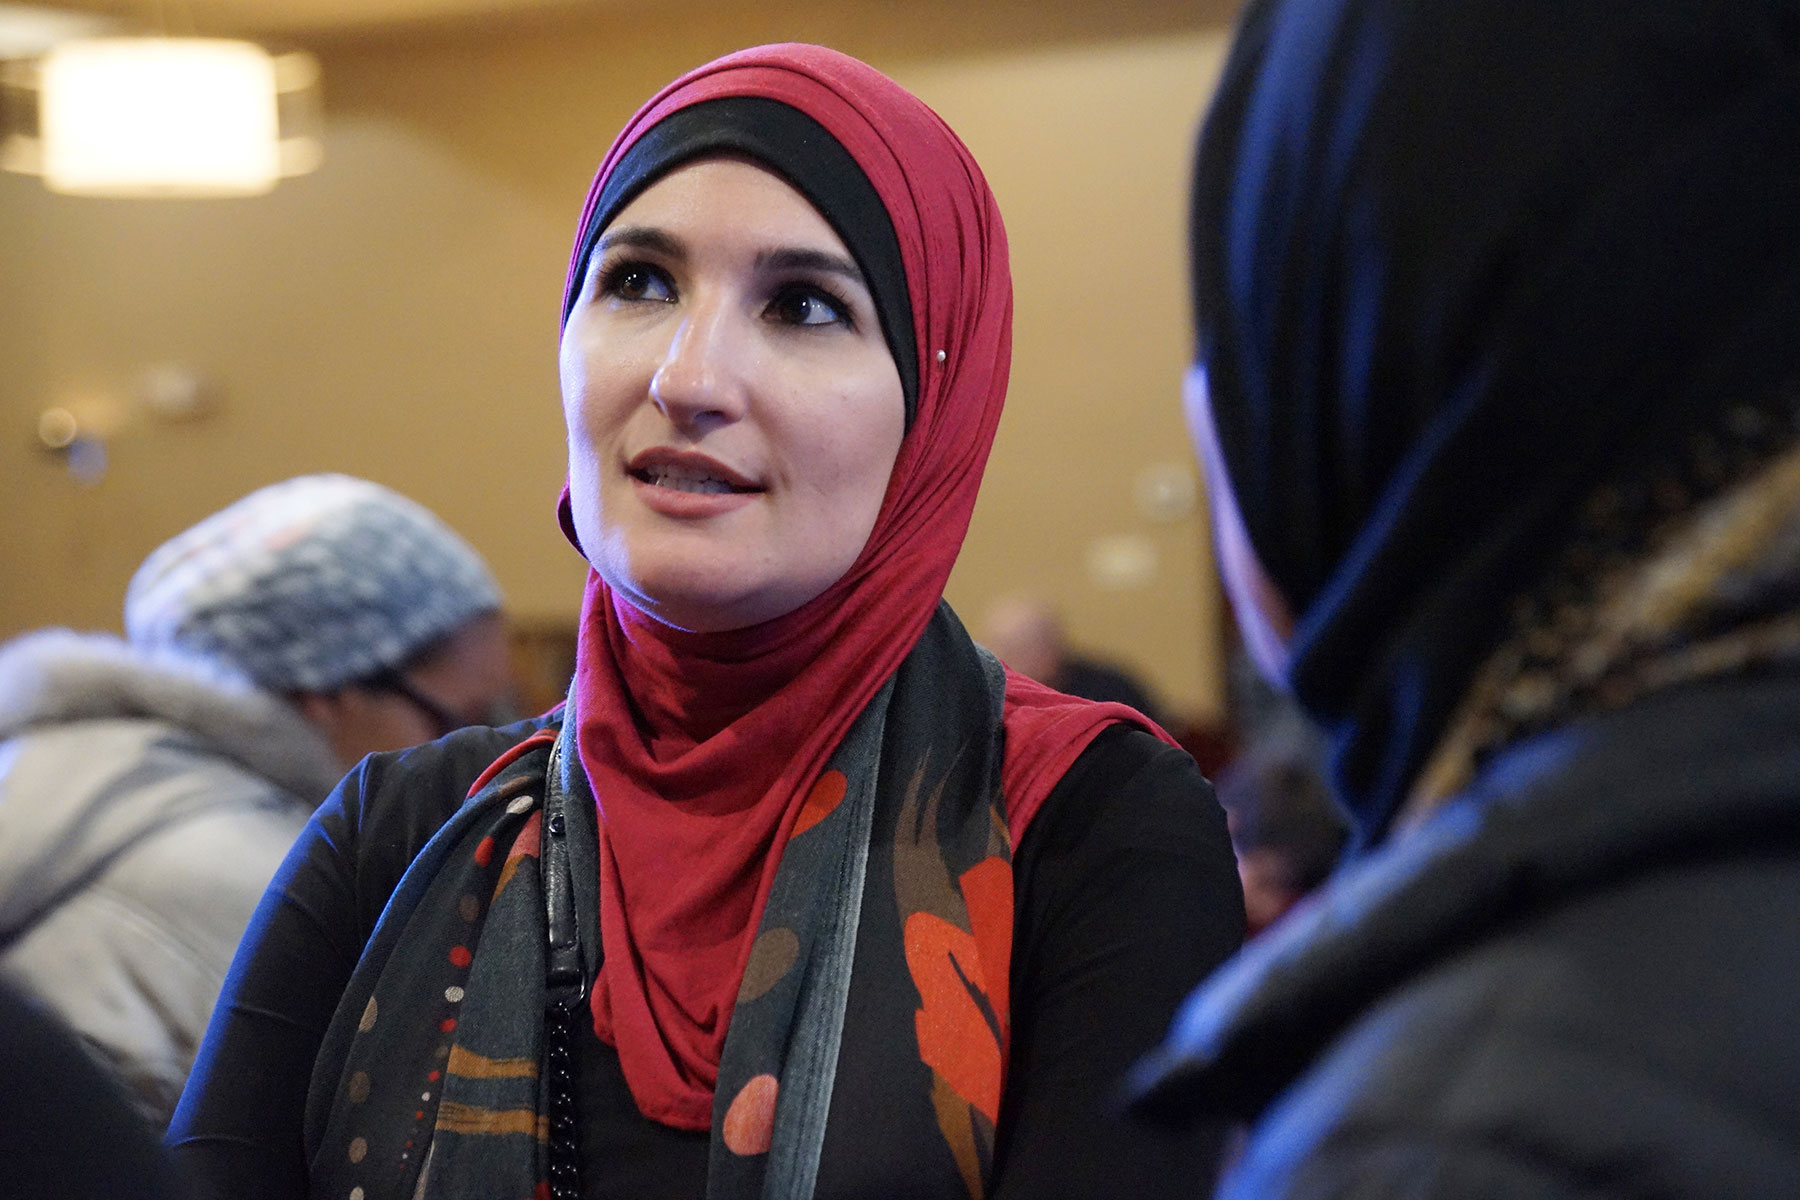 Linda Sarsour: What It Means To Be Unapologetically Muslim